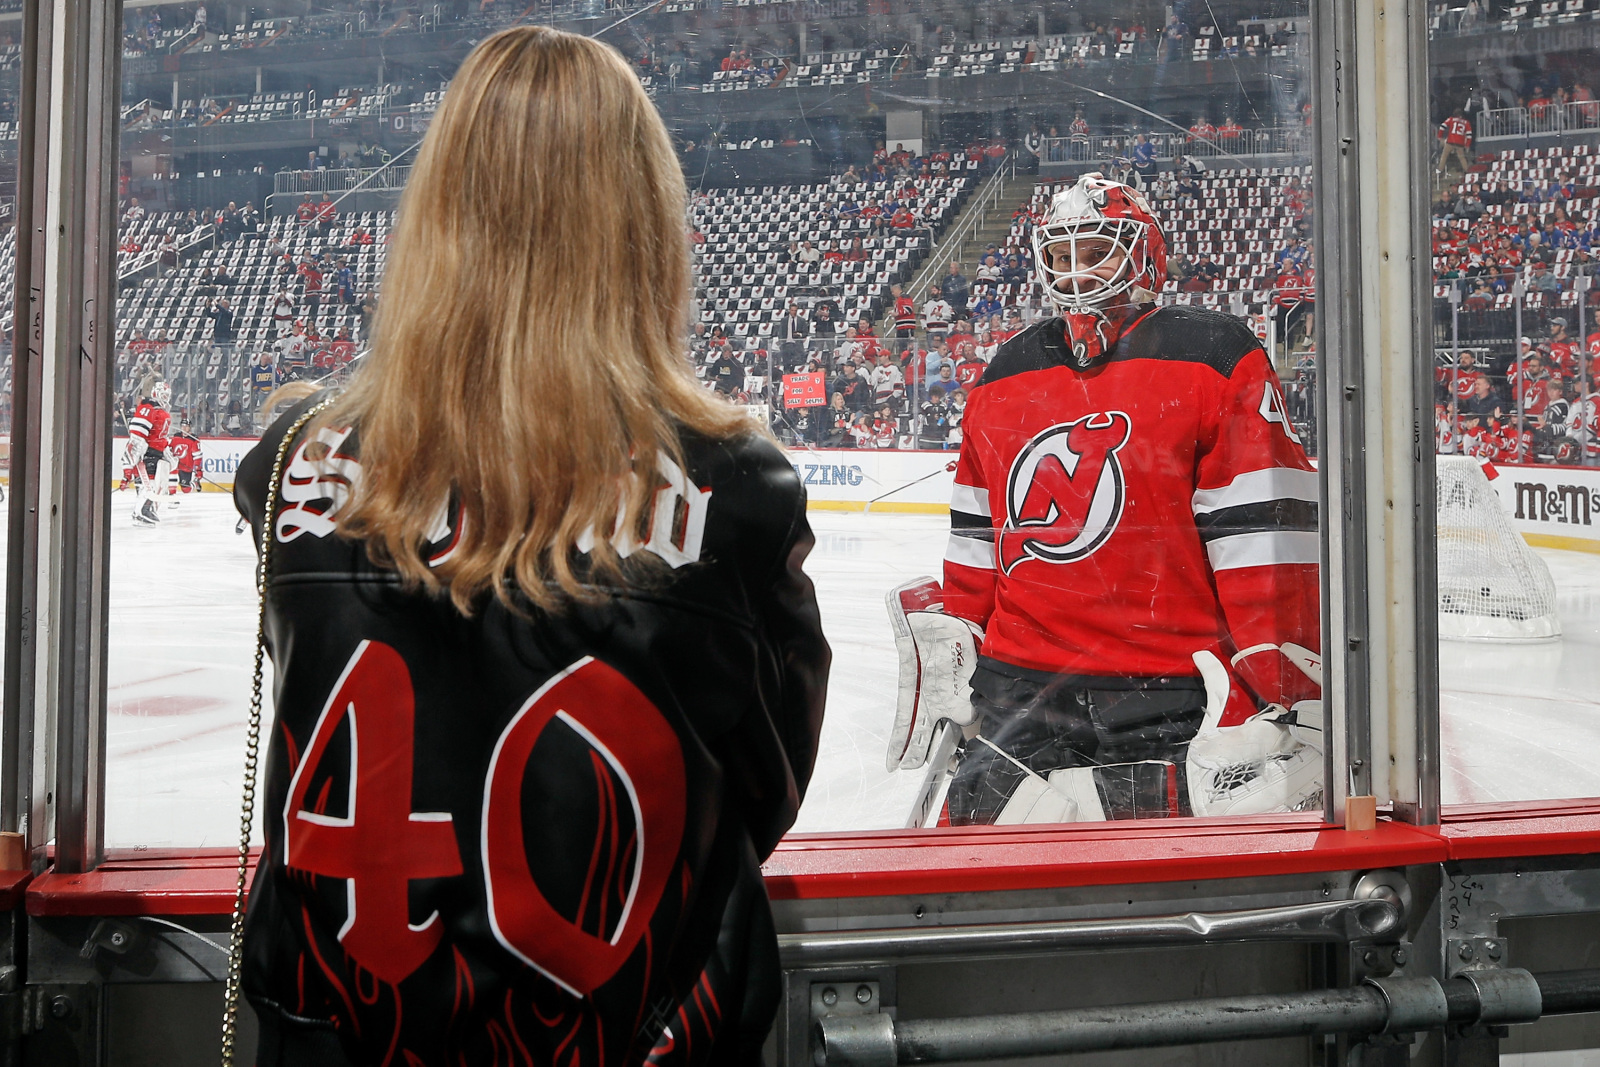 Schmid, Devils play near perfect to take series lead — The Fourth